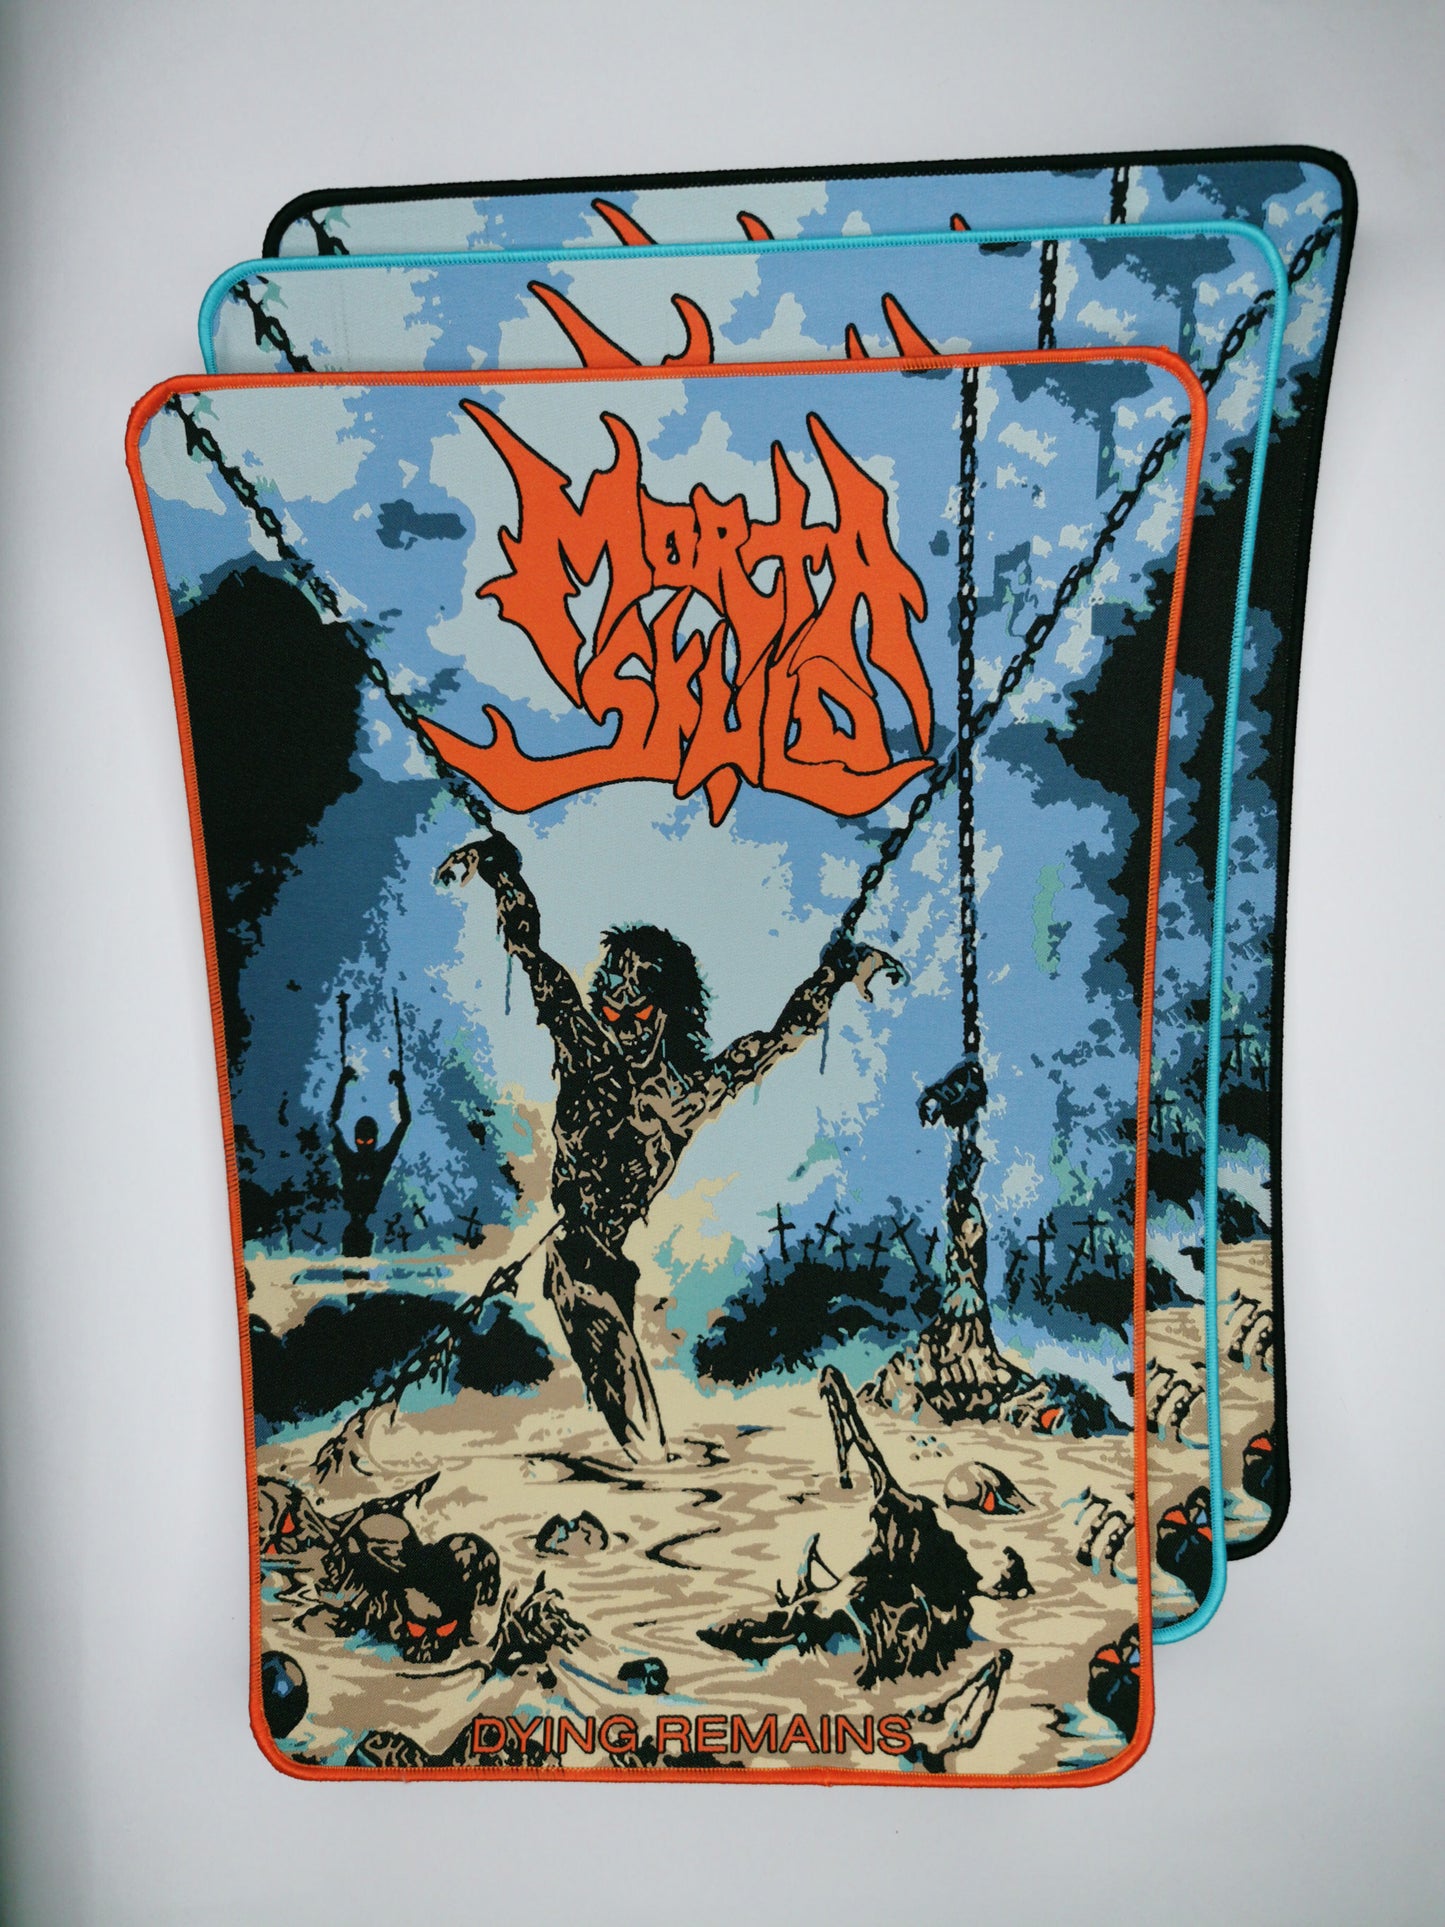 Temporal Dimensions Patches Morta Skuld Dying Remains Woven Backpatches